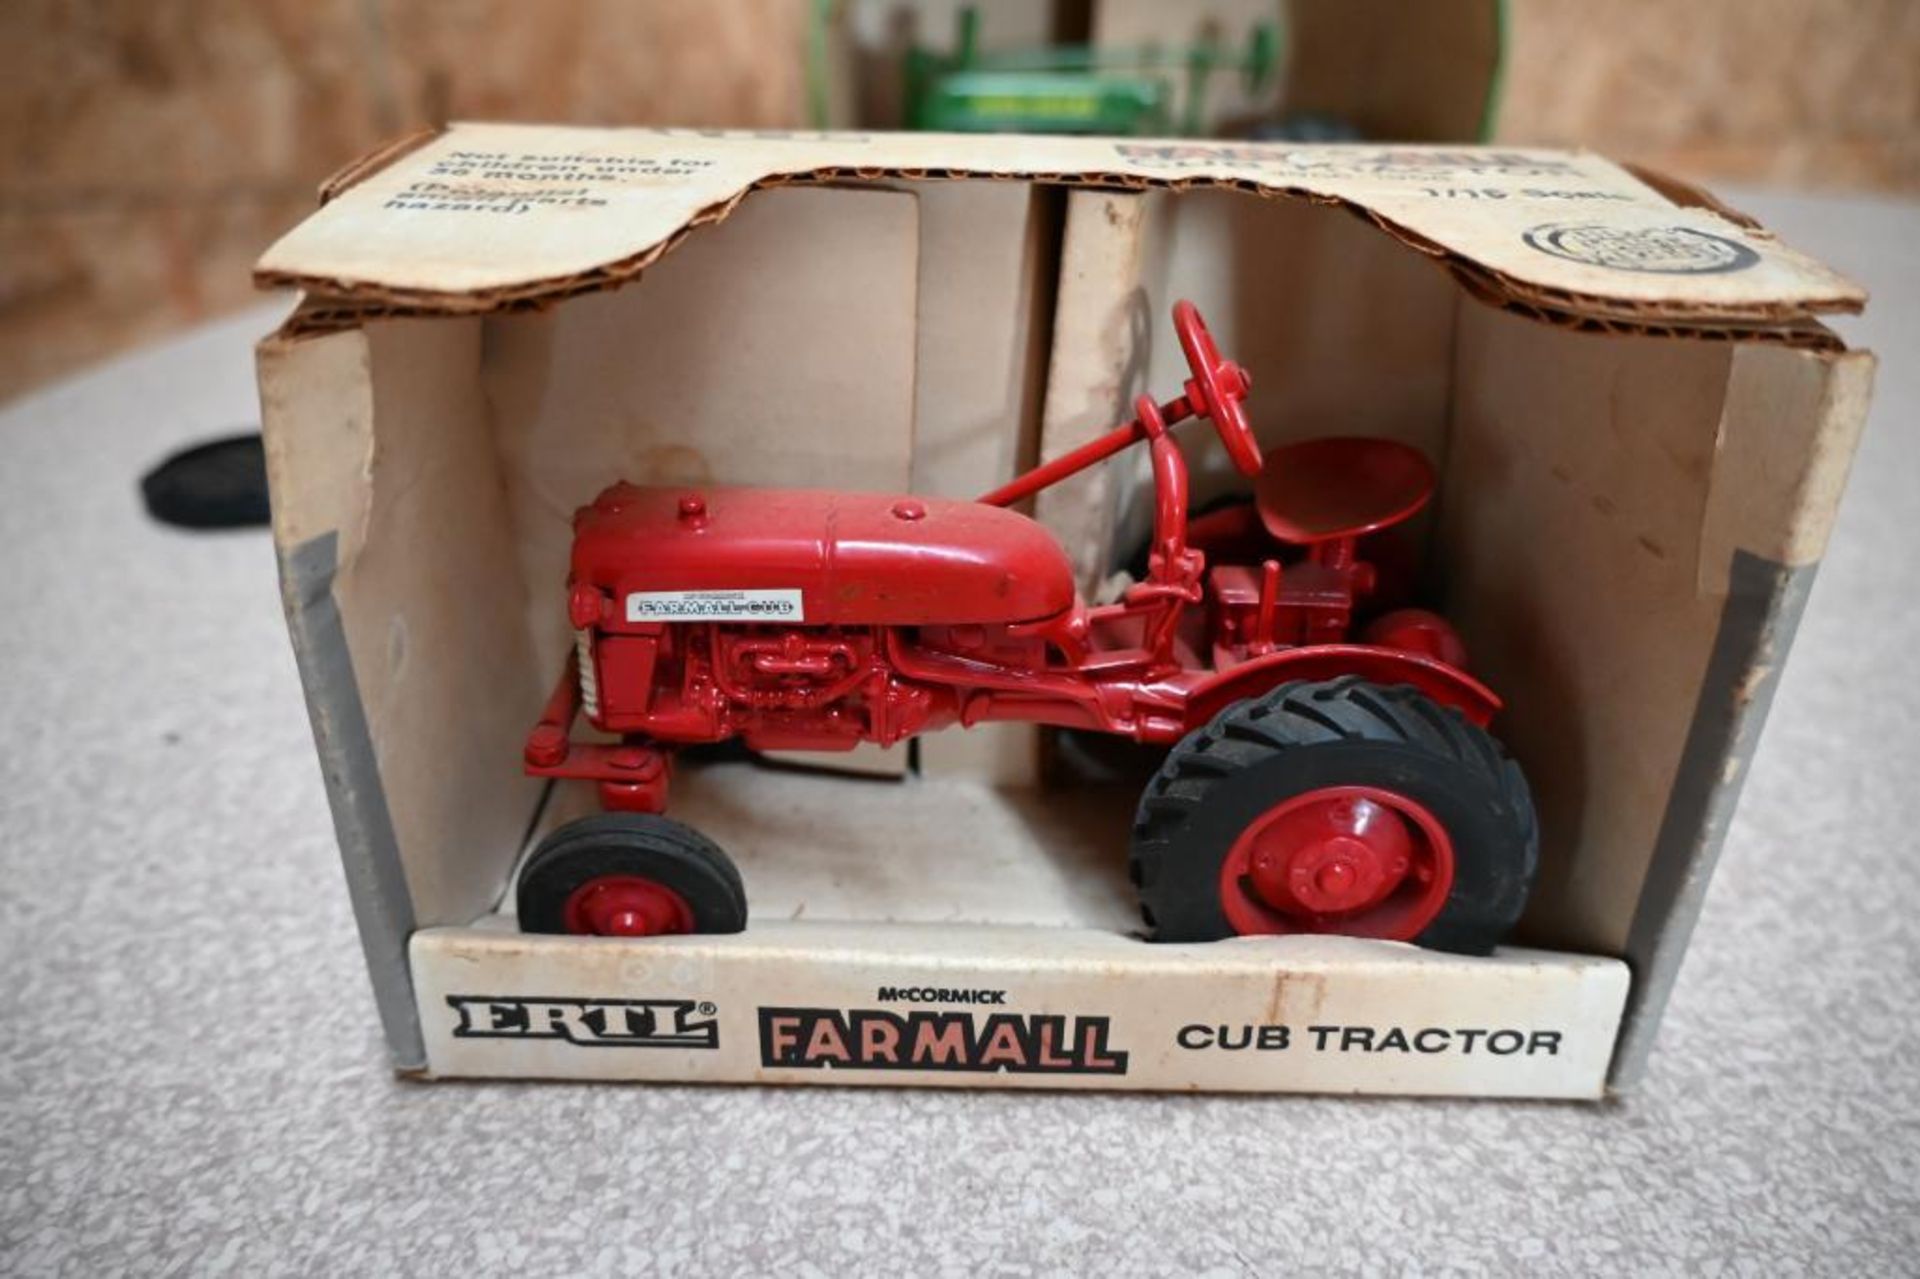 1/16 Scale Die Cast Metal Farmall Cub Tractor - Image 2 of 3